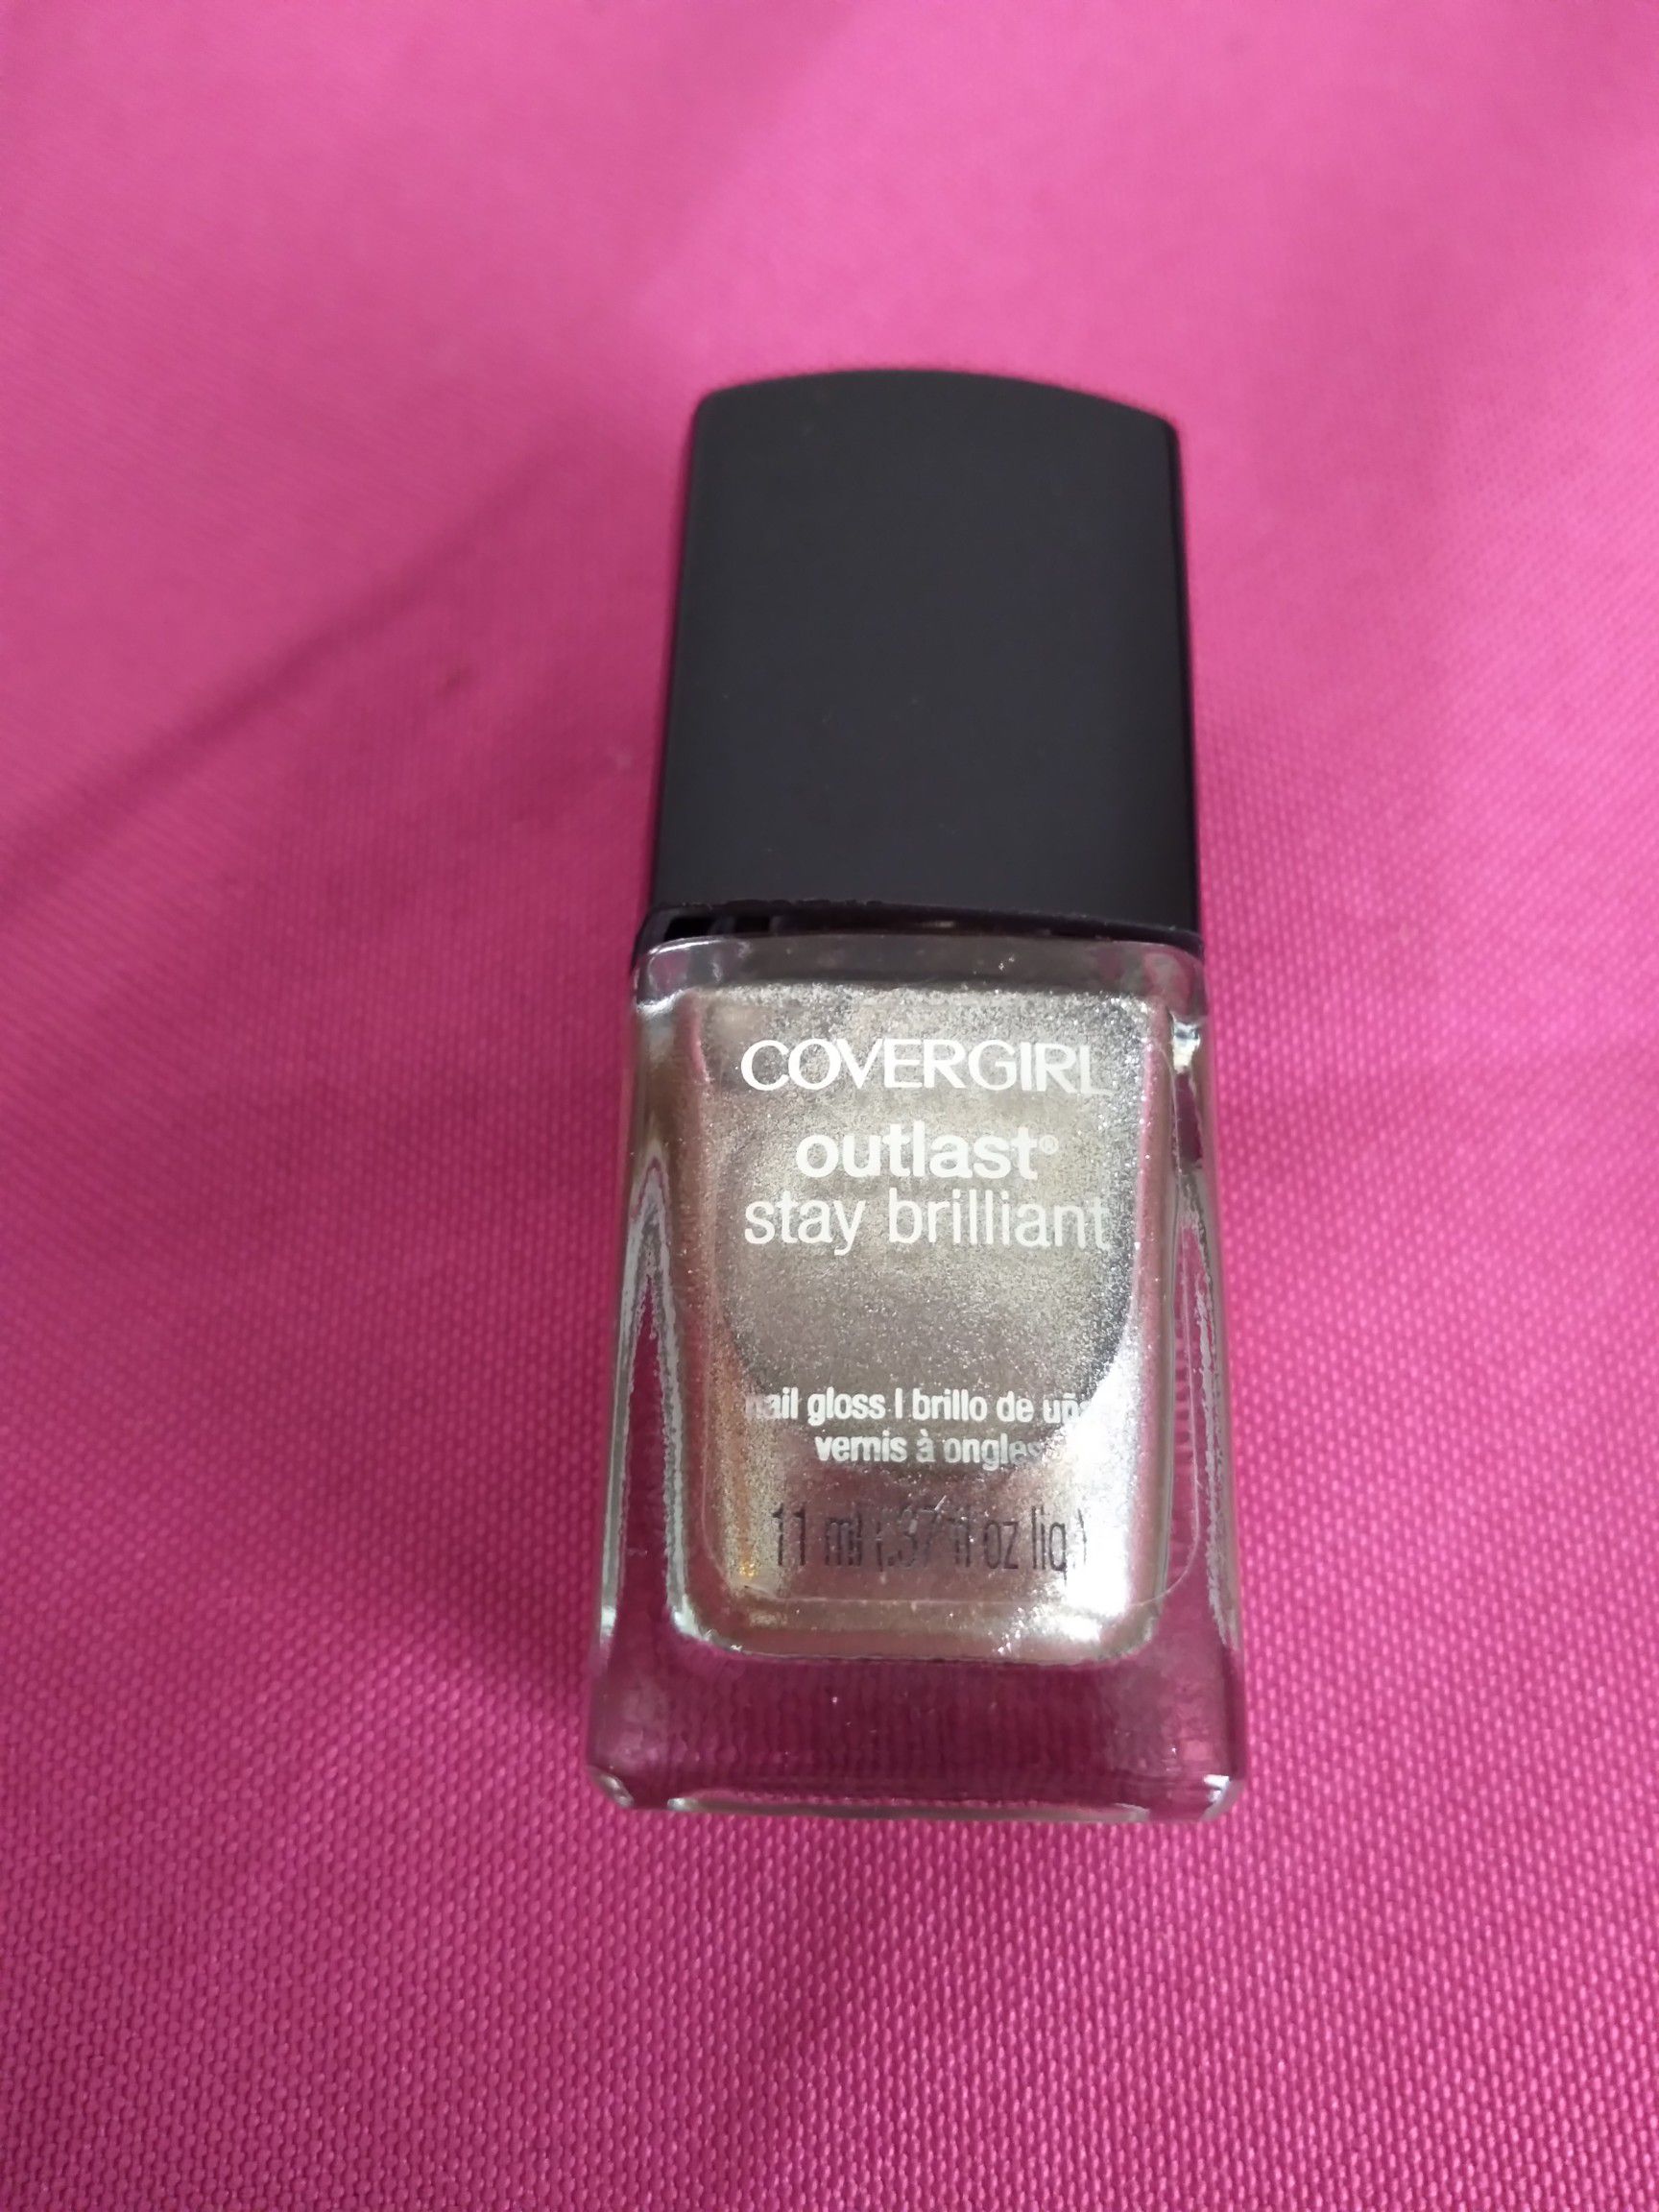 New Covergirl Nail polish in "Bronze Beauty"